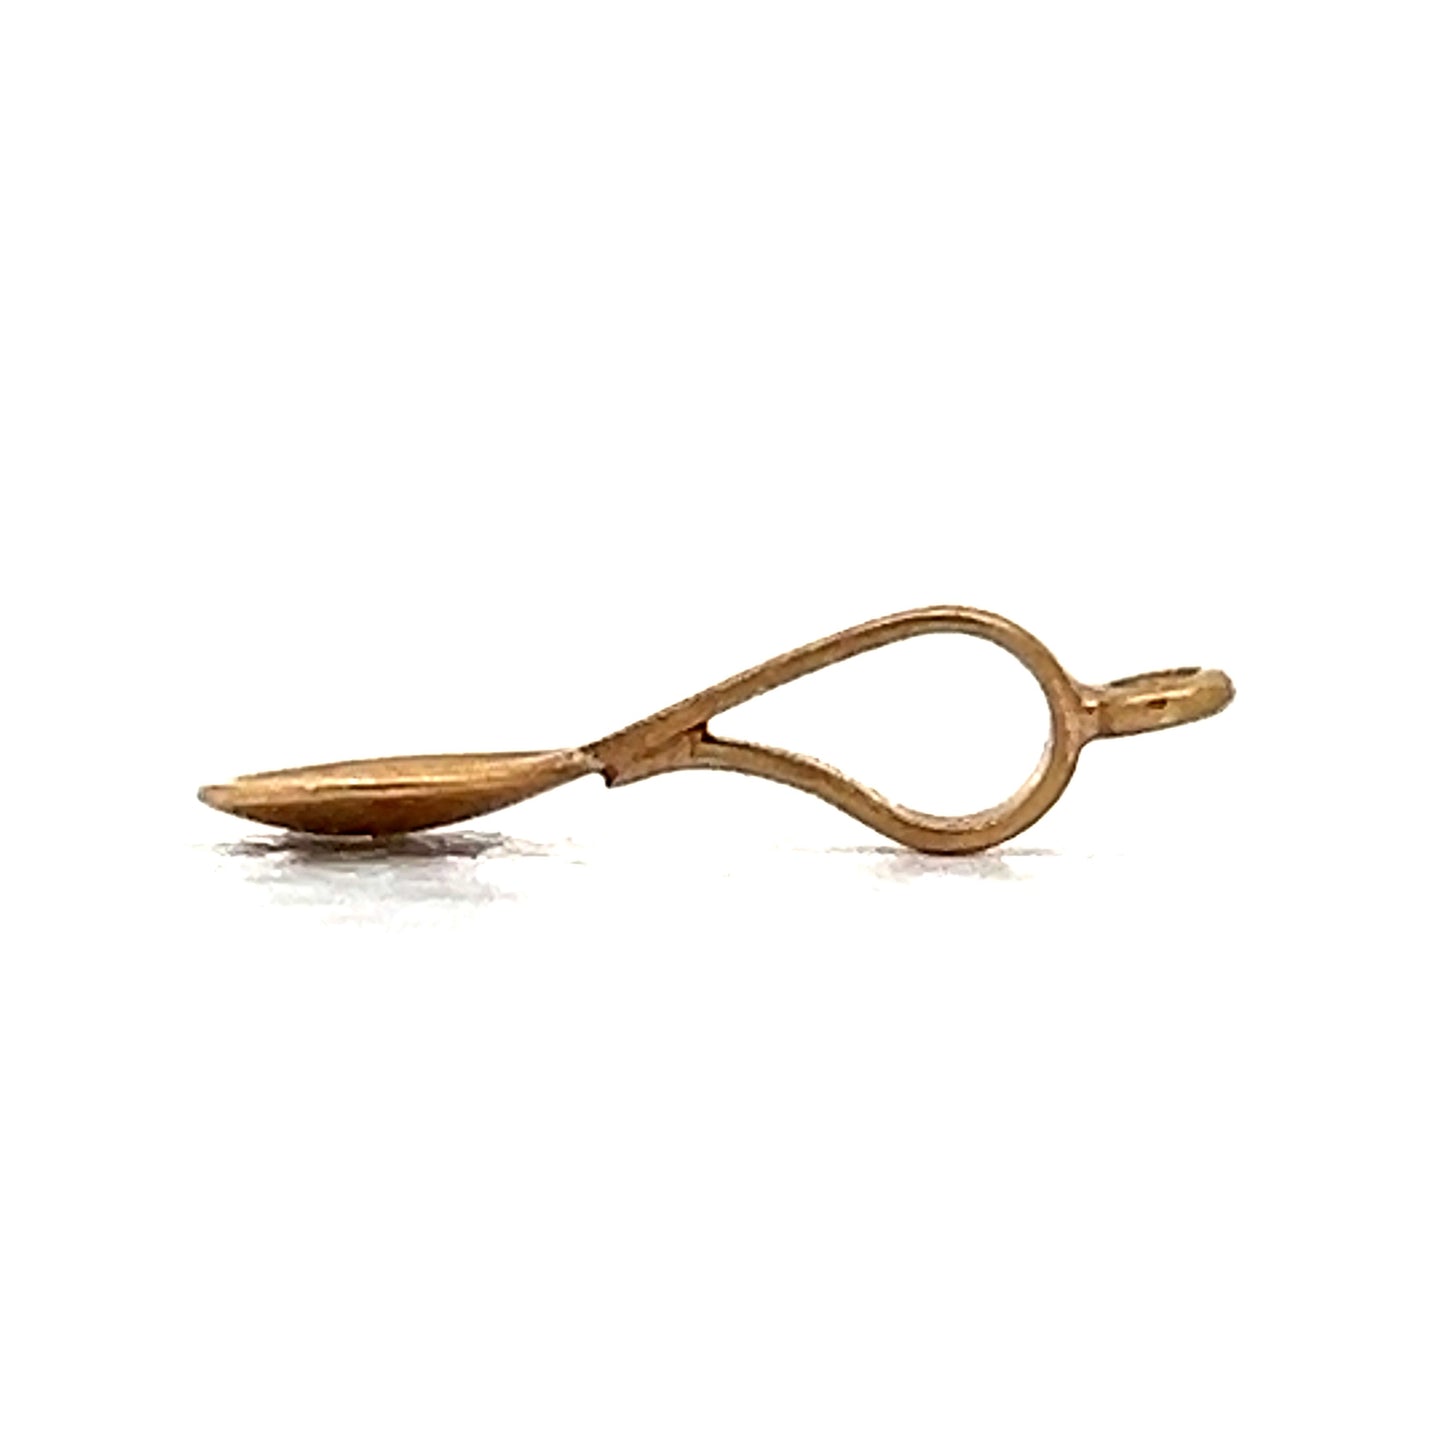 Vintage Mid-Century Spoon Charm in 14k Yellow Gold